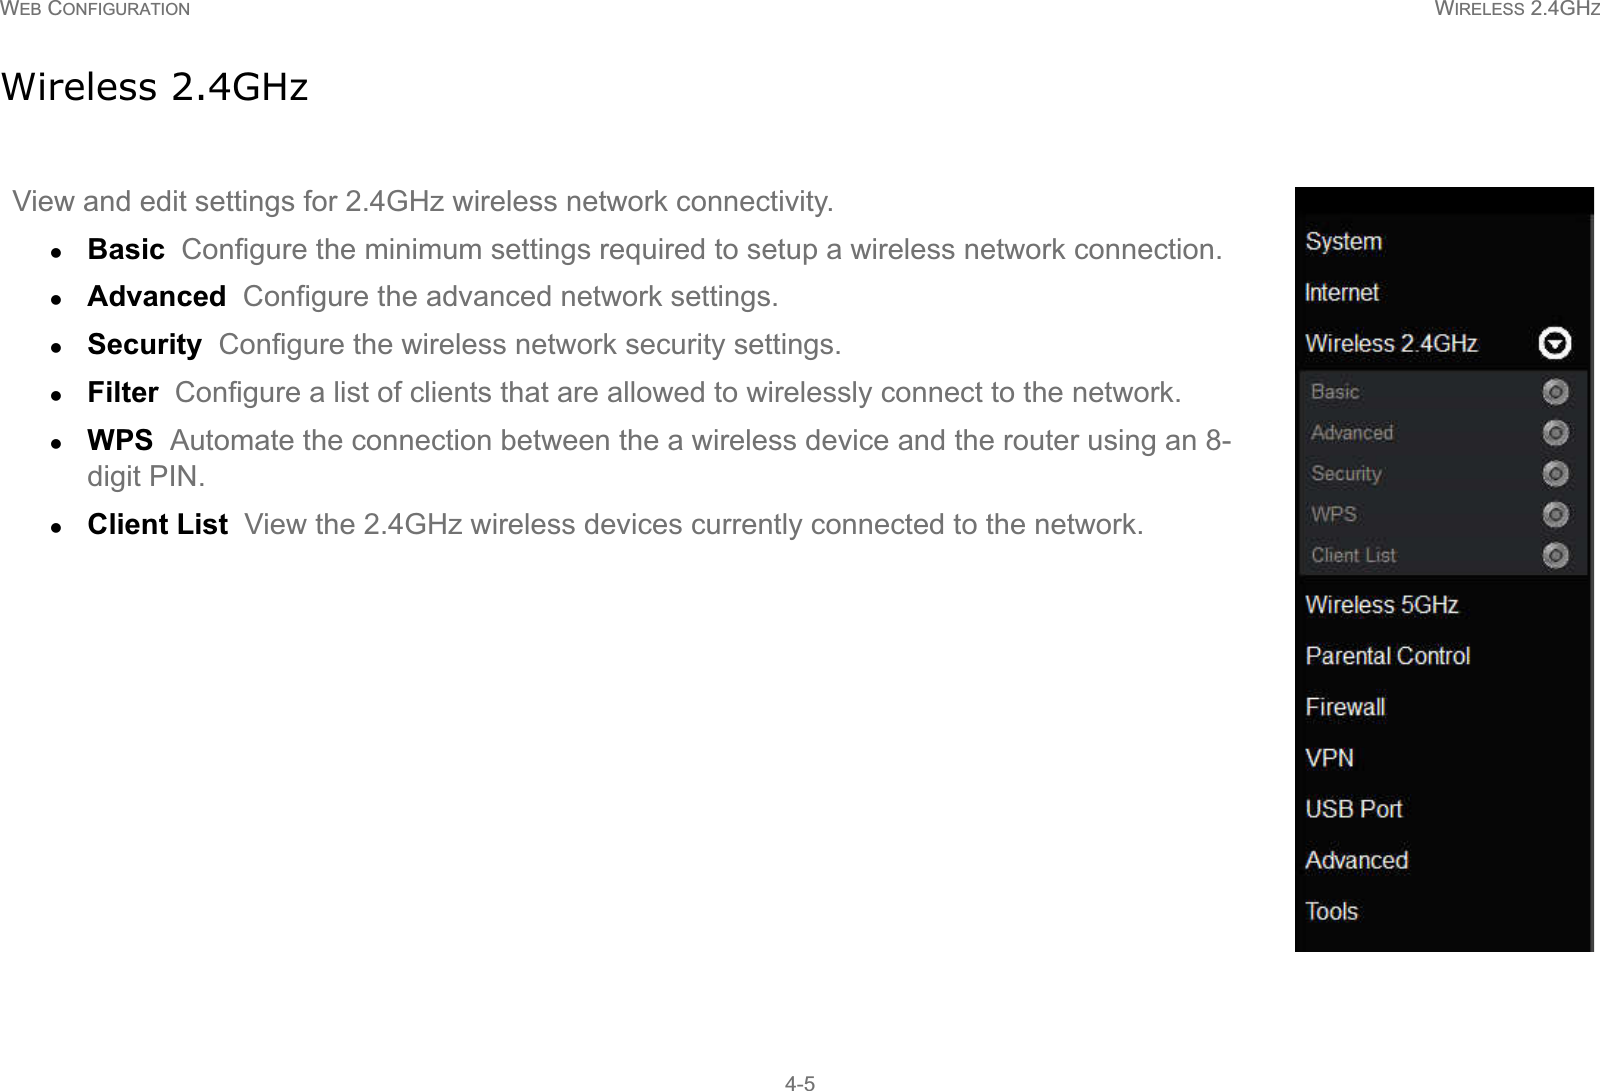 WEB CONFIGURATION WIRELESS 2.4GHZ4-5Wireless 2.4GHzView and edit settings for 2.4GHz wireless network connectivity.zBasic  Configure the minimum settings required to setup a wireless network connection.zAdvanced  Configure the advanced network settings.zSecurity  Configure the wireless network security settings.zFilter  Configure a list of clients that are allowed to wirelessly connect to the network.zWPS  Automate the connection between the a wireless device and the router using an 8-digit PIN.zClient List  View the 2.4GHz wireless devices currently connected to the network.